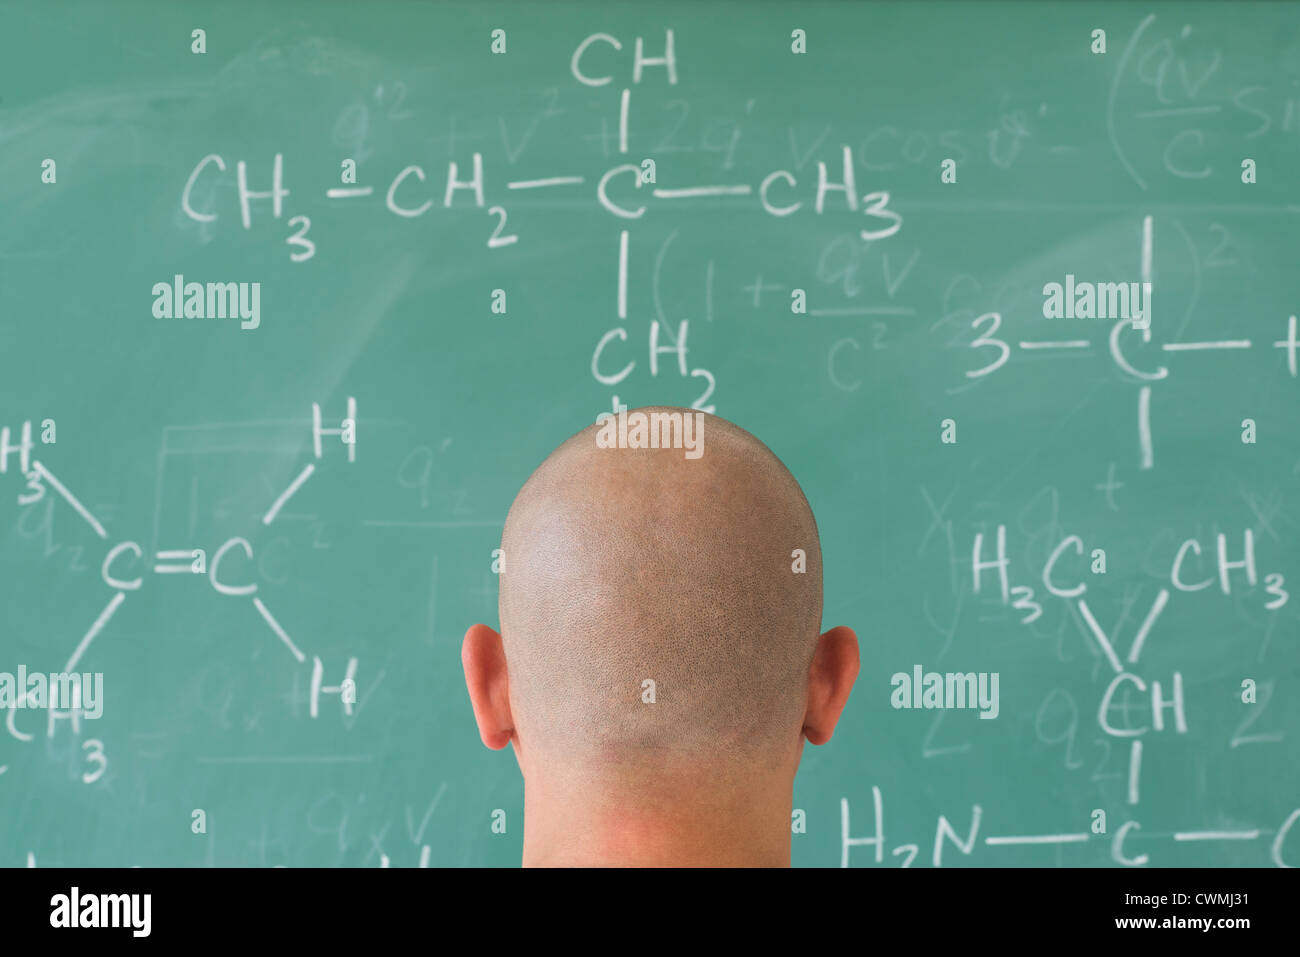 Man in front of blackboard with formulas Stock Photo